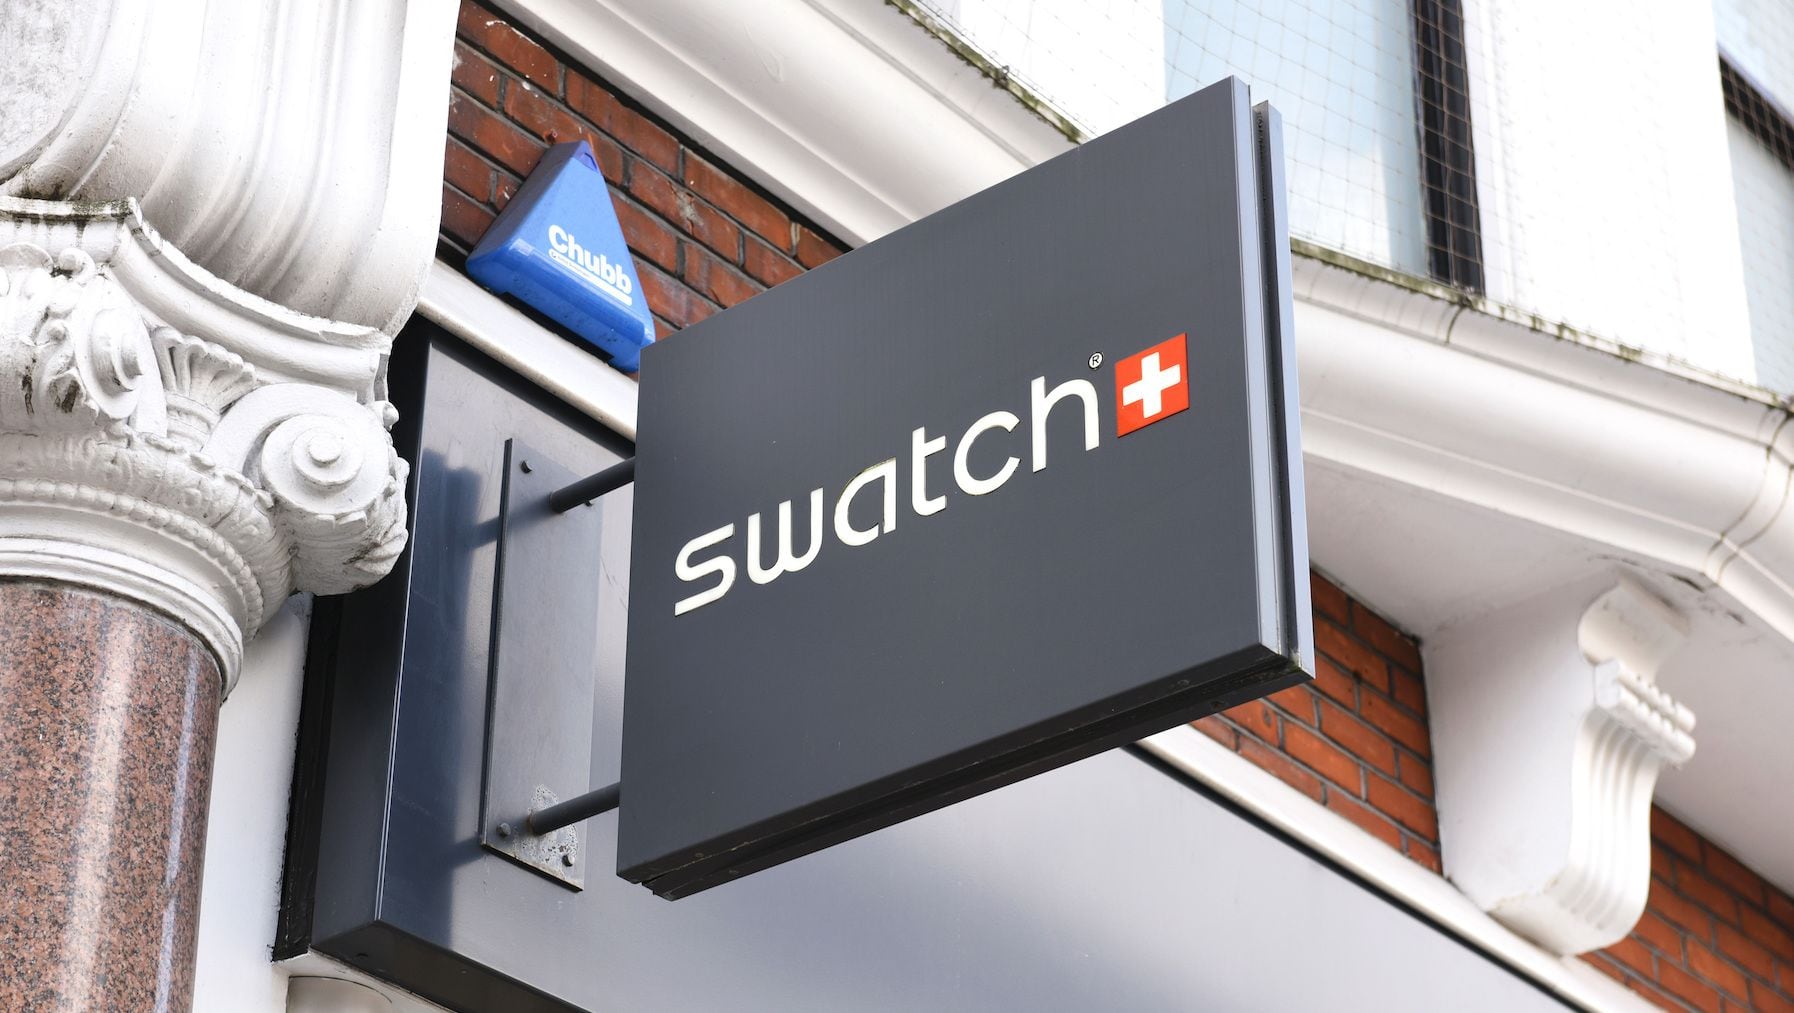 Swatch Shakes Up Executive Committee as Luxury Slowdown Persists